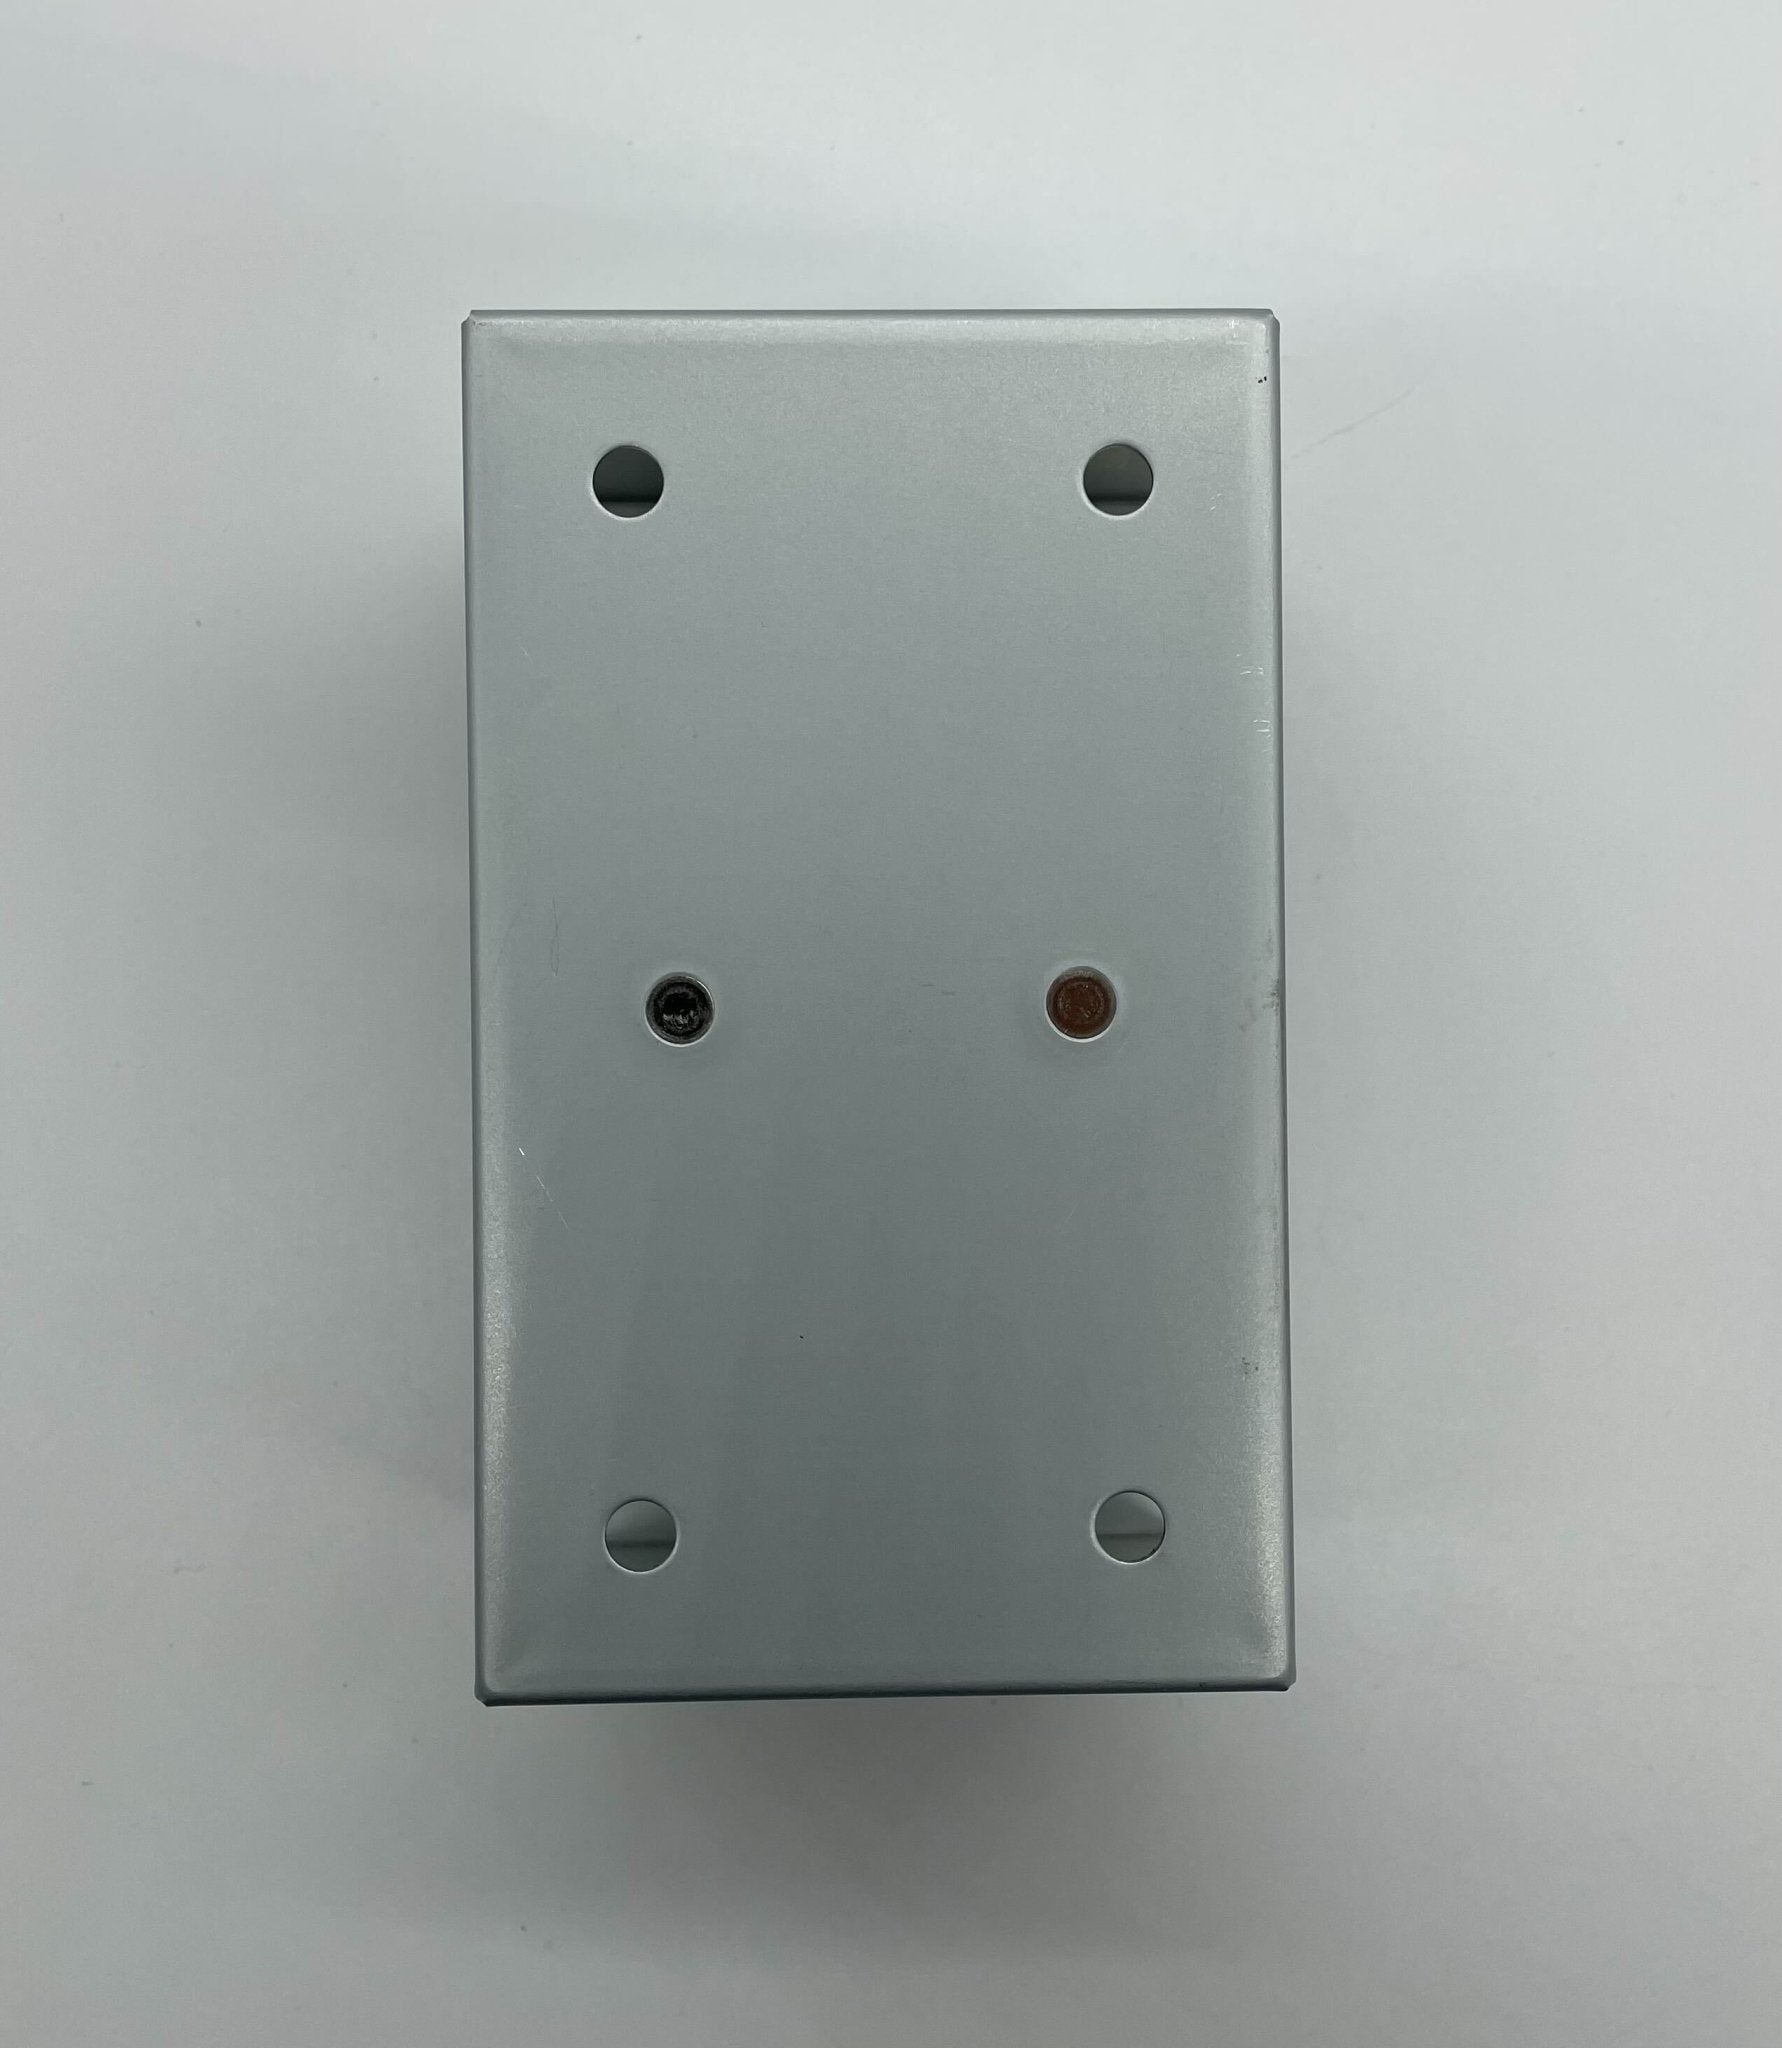 Space Age MR-201/C/R Electronics Mr-201/C/R - The Fire Alarm Supplier